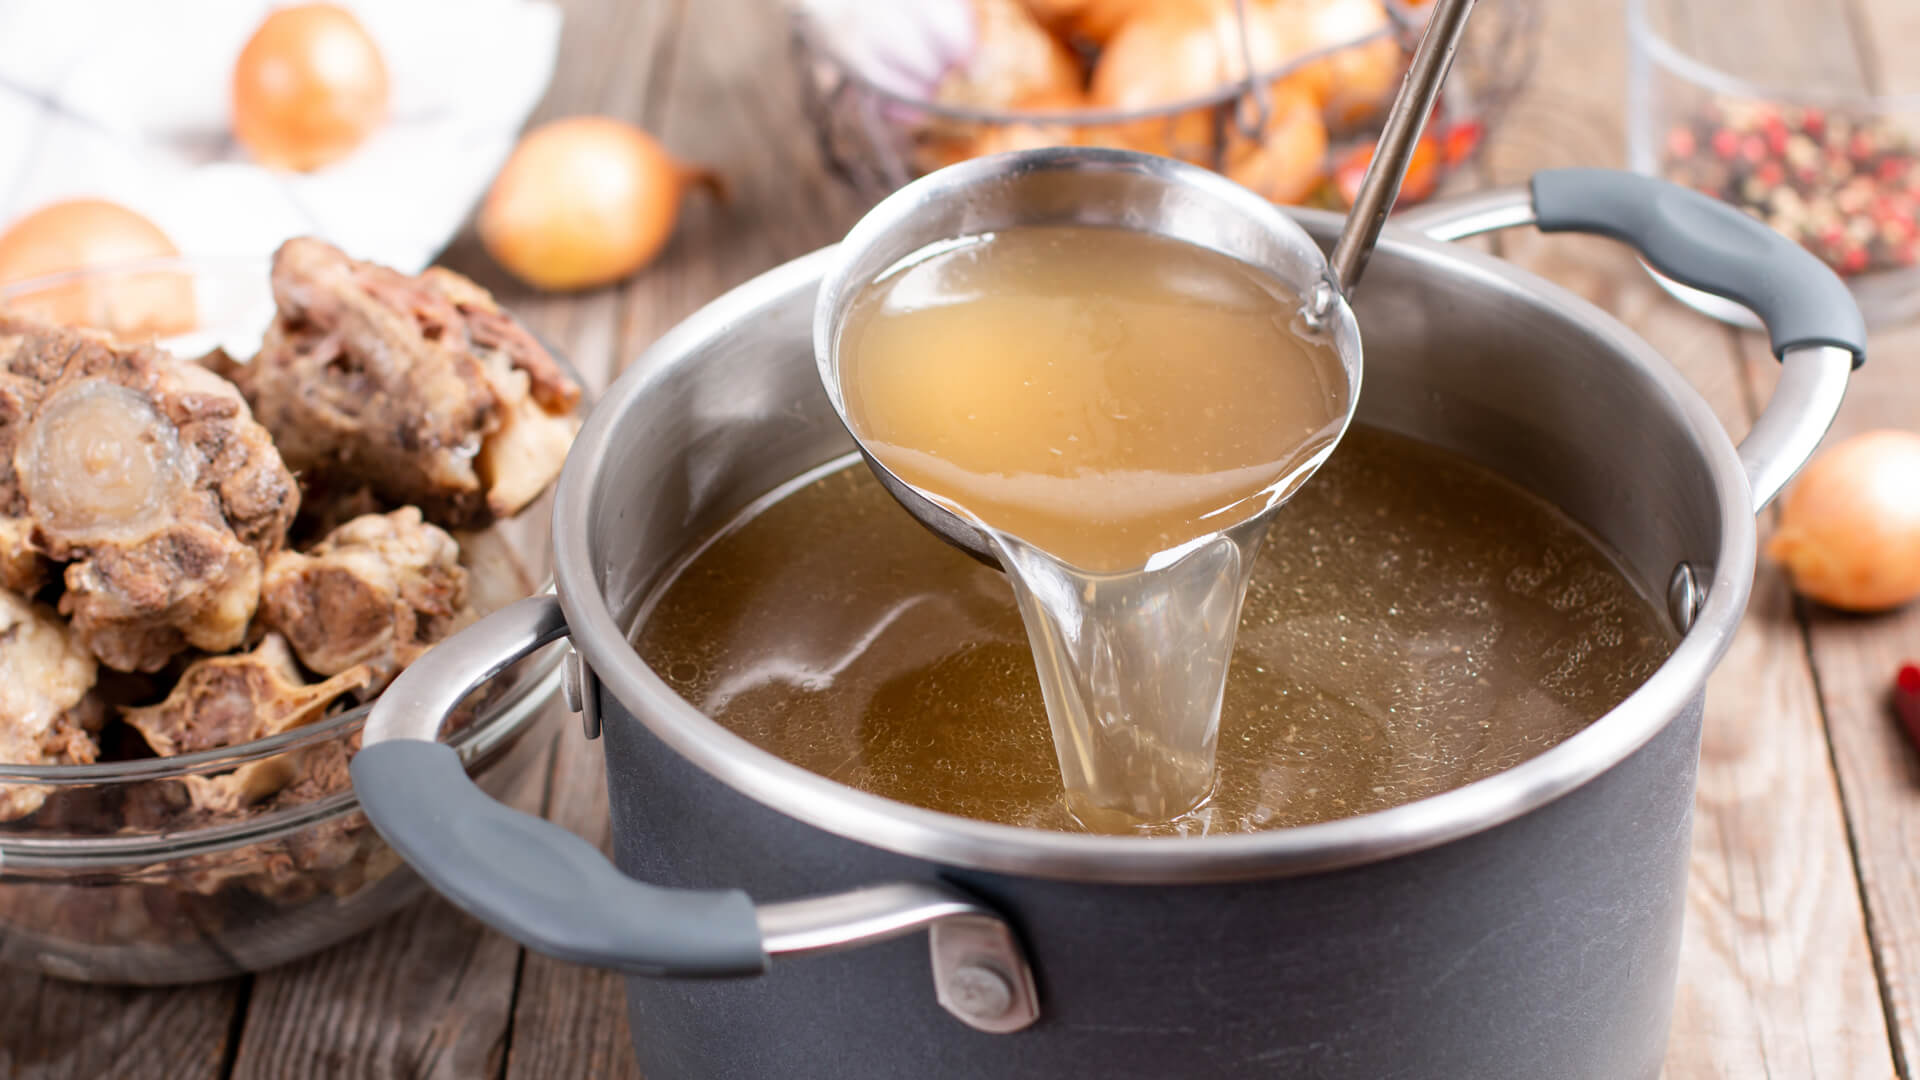 Can bone broth live up to the expectations?